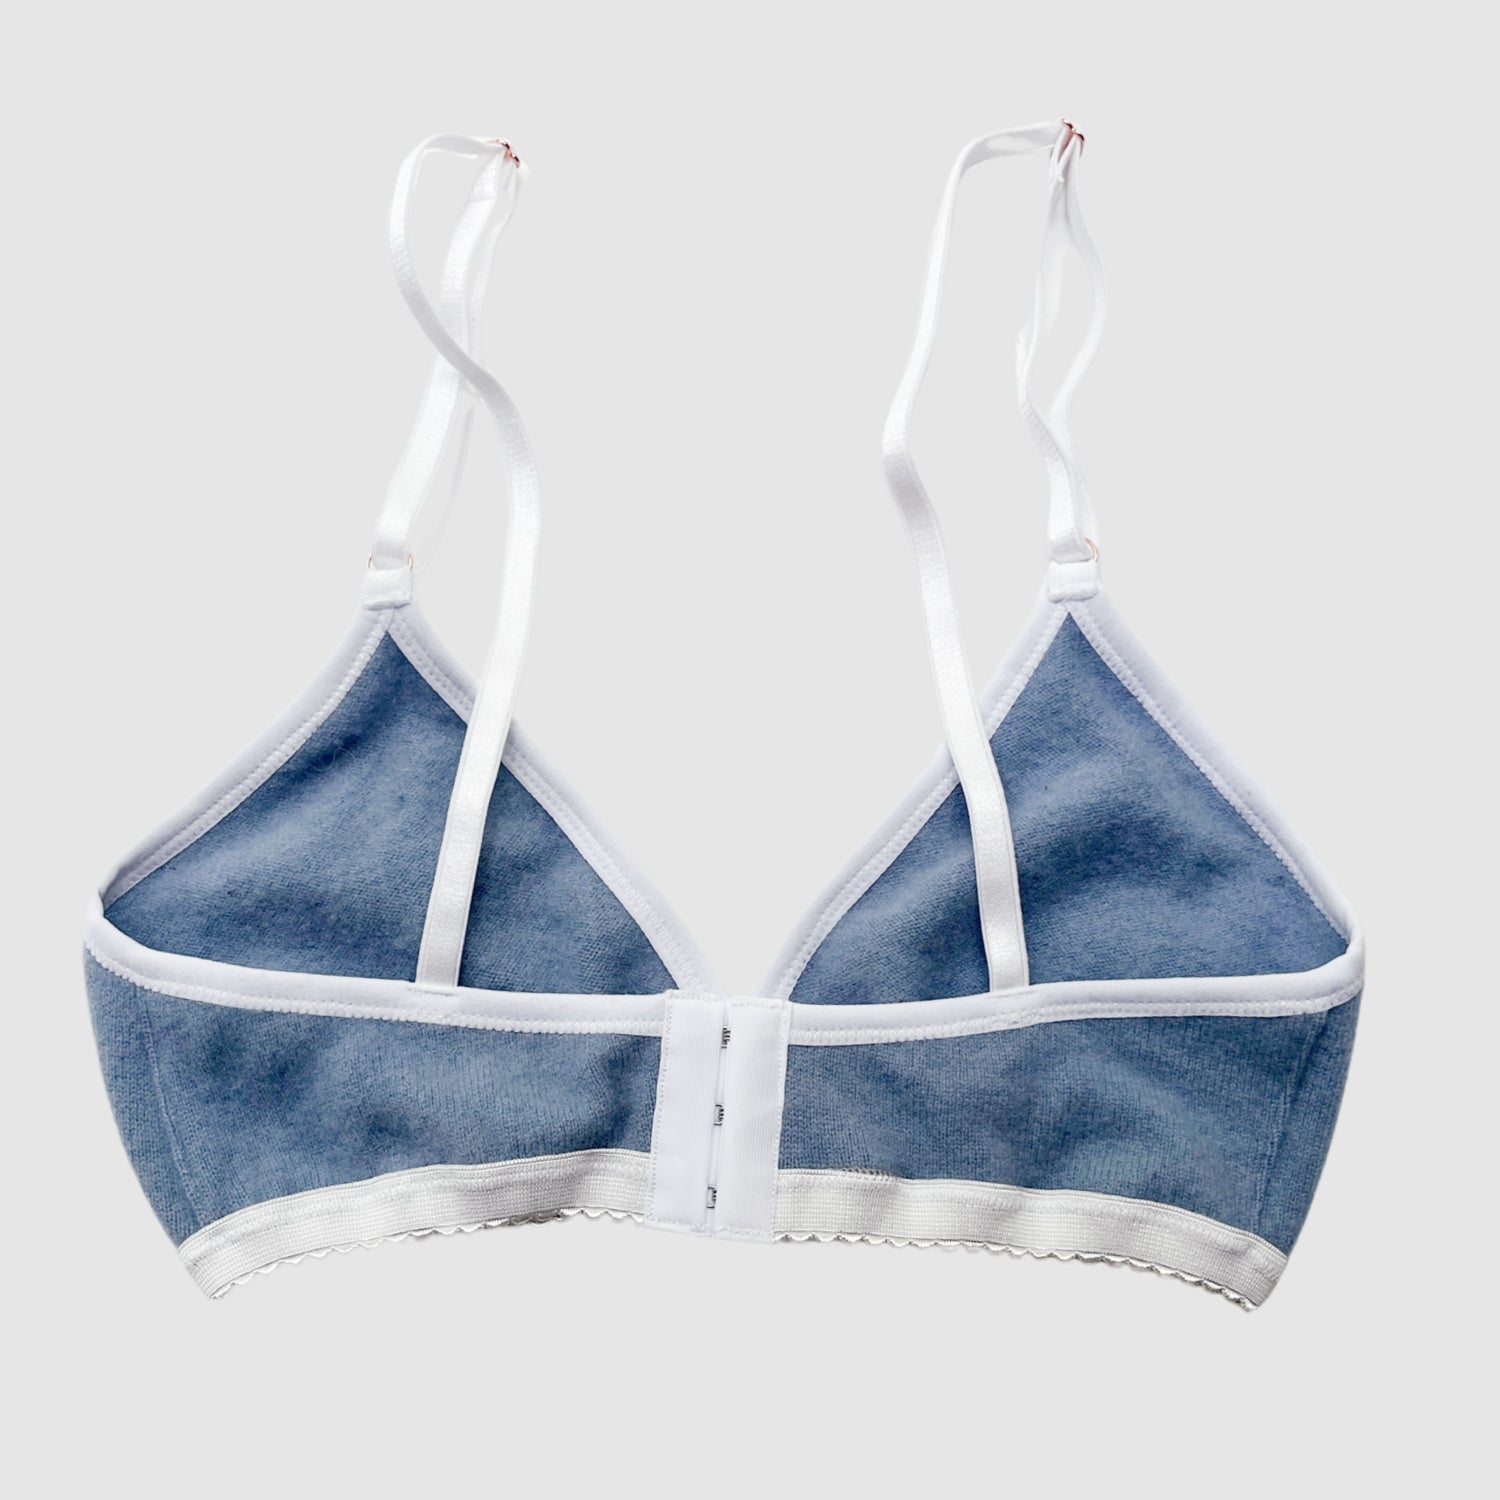 Shop made in Canada Blue Cashmere bra size Small | Ready to ship cashmere lingerie 